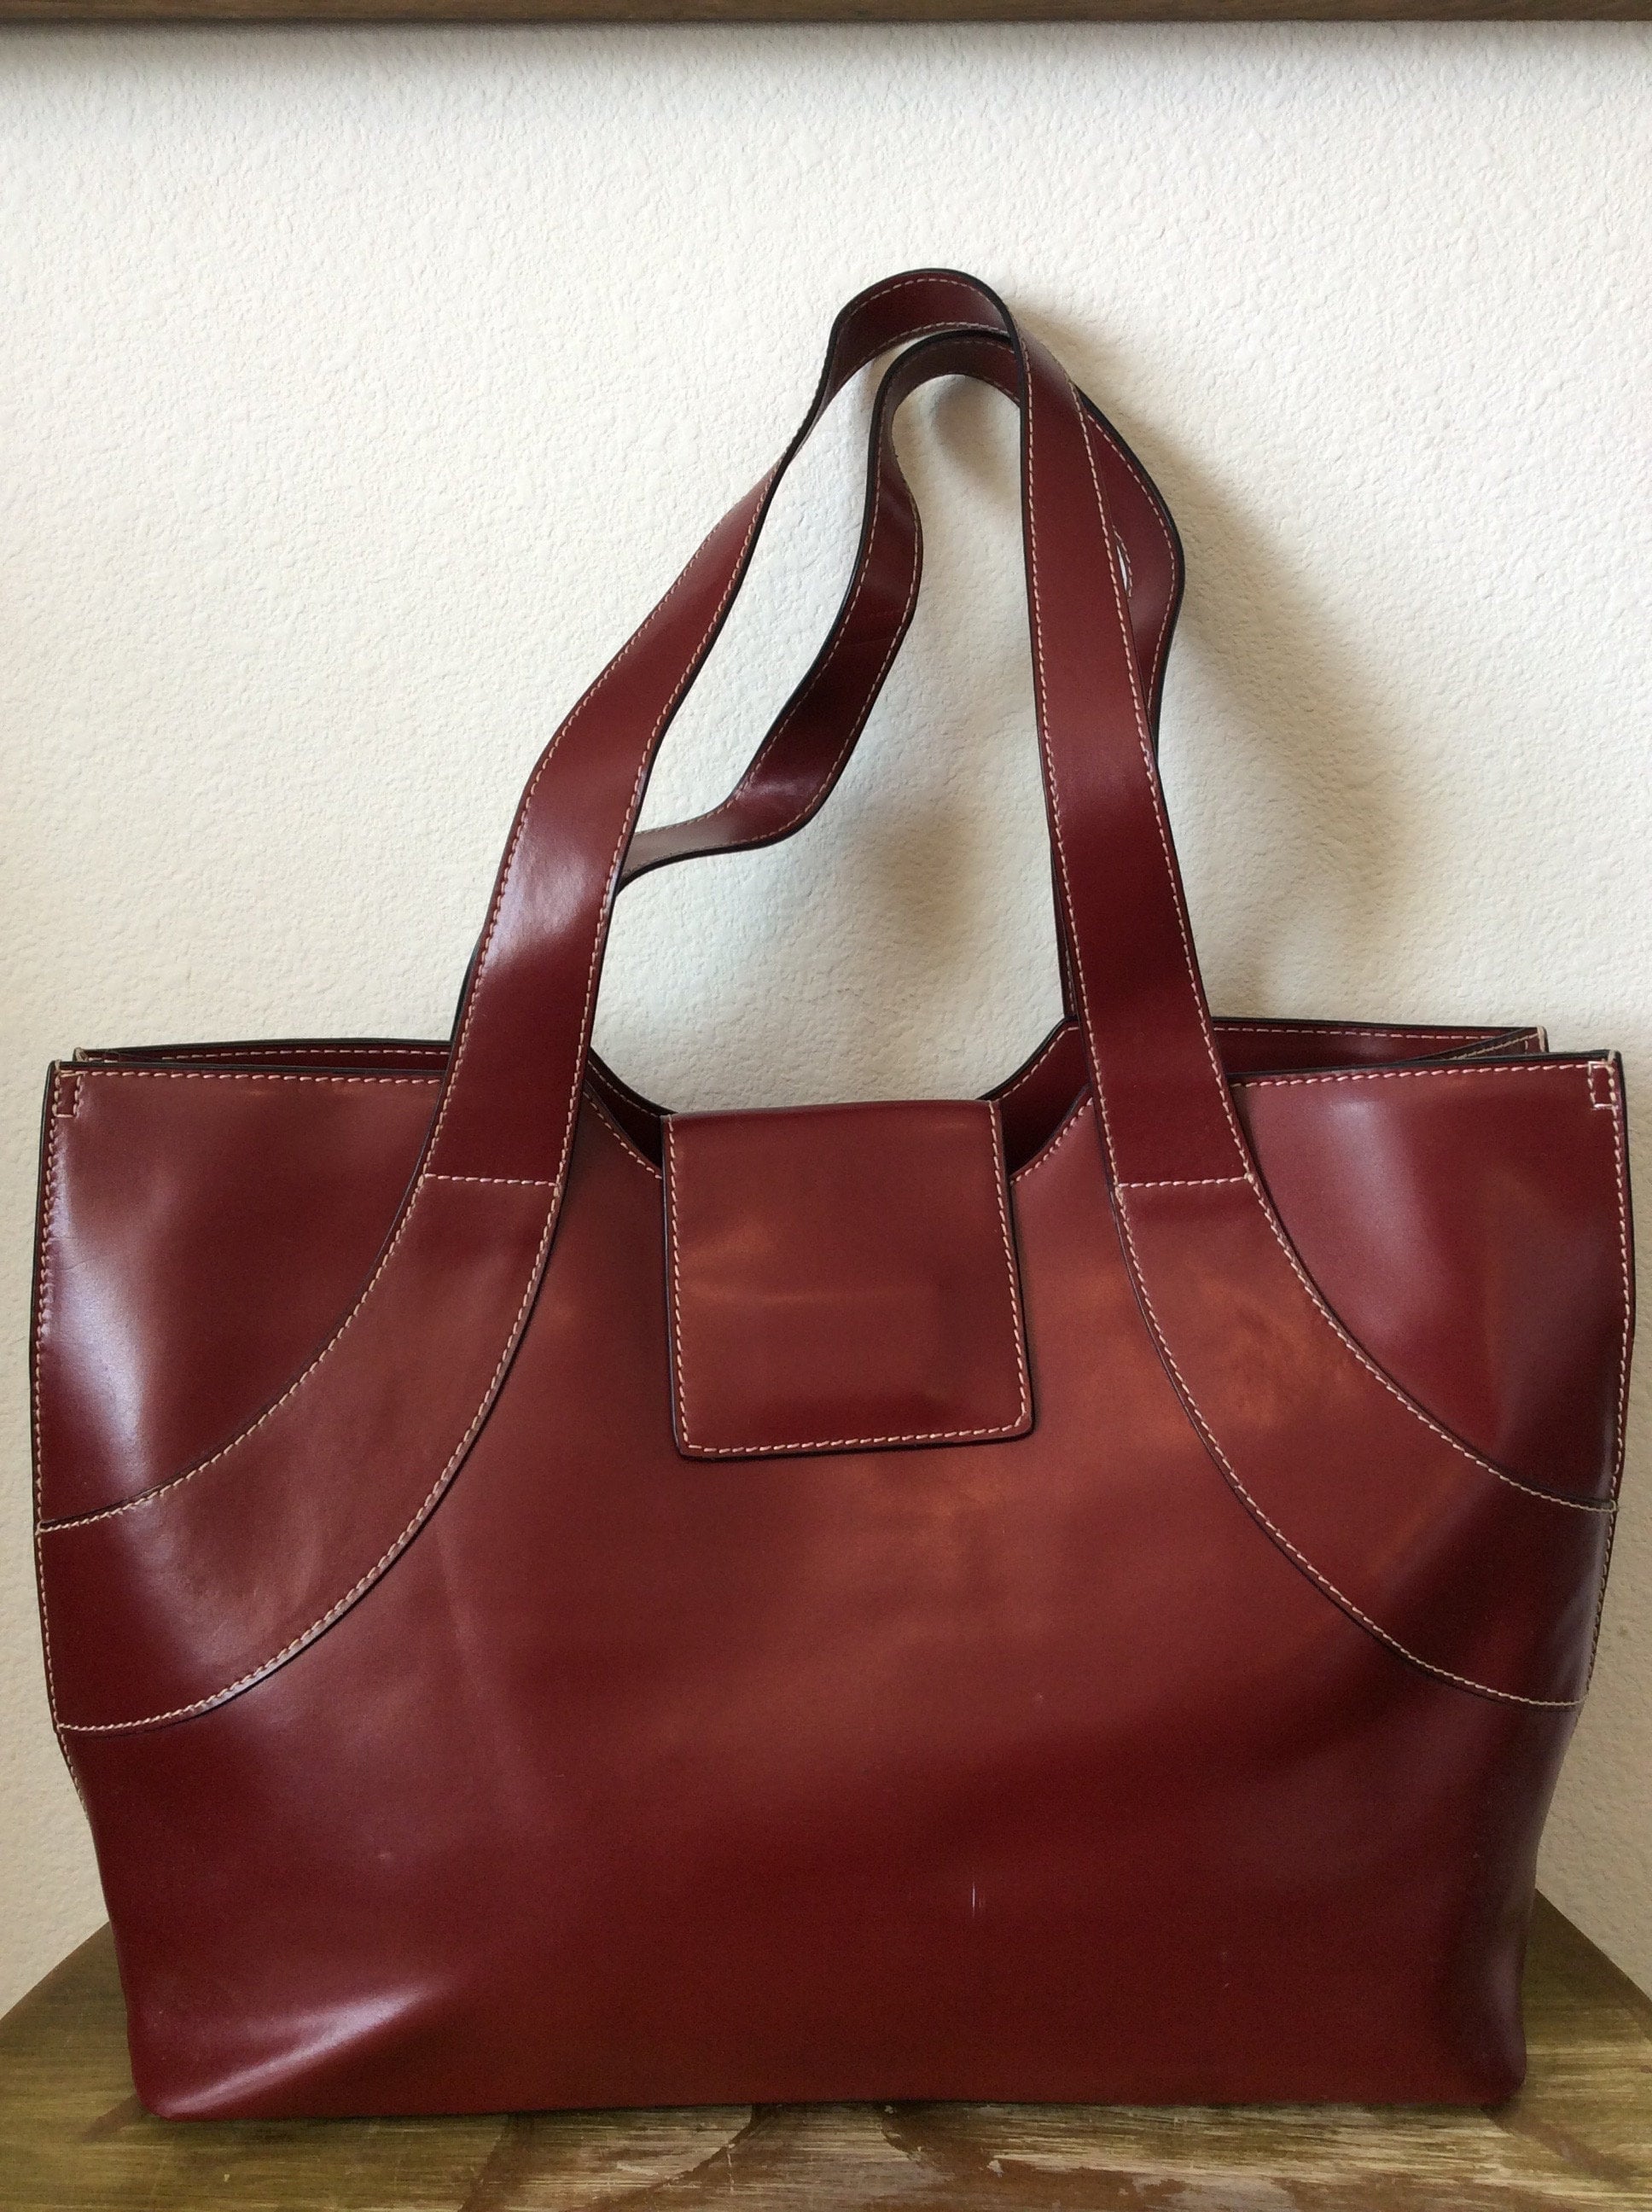 Franklin Covey Tote 